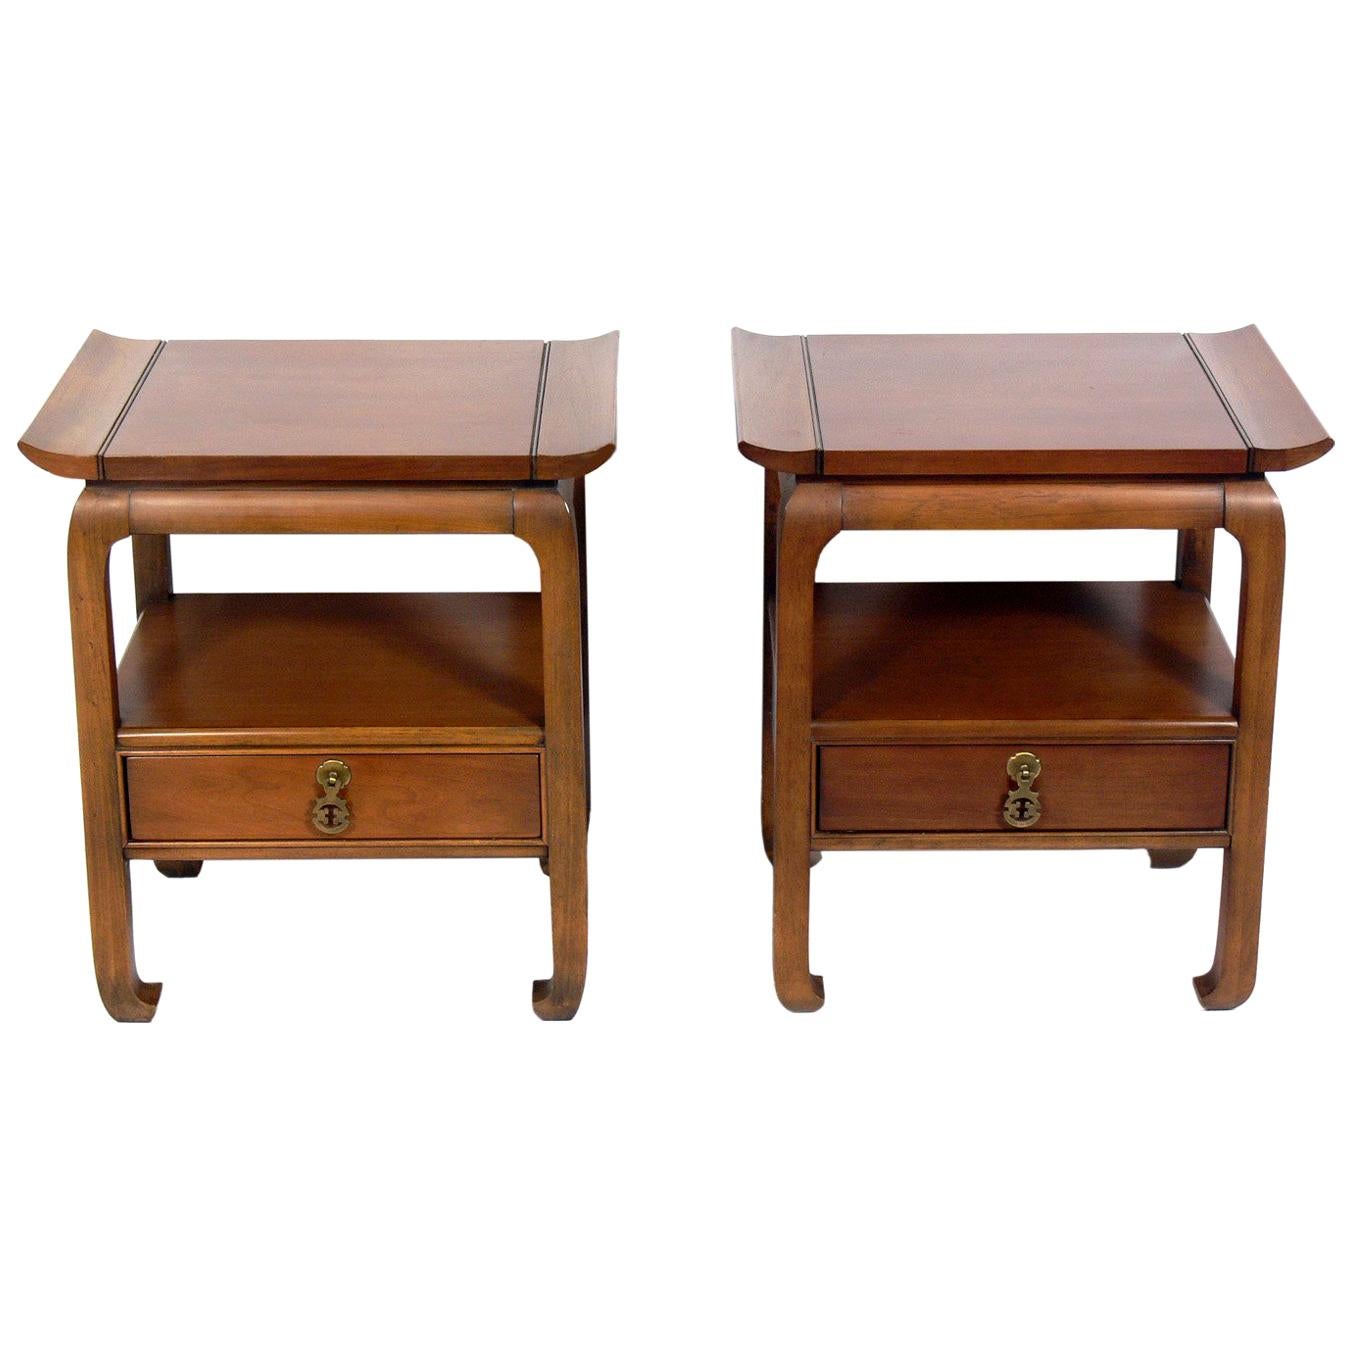 Pair of Asian Style Midcentury End Tables or Nightstands